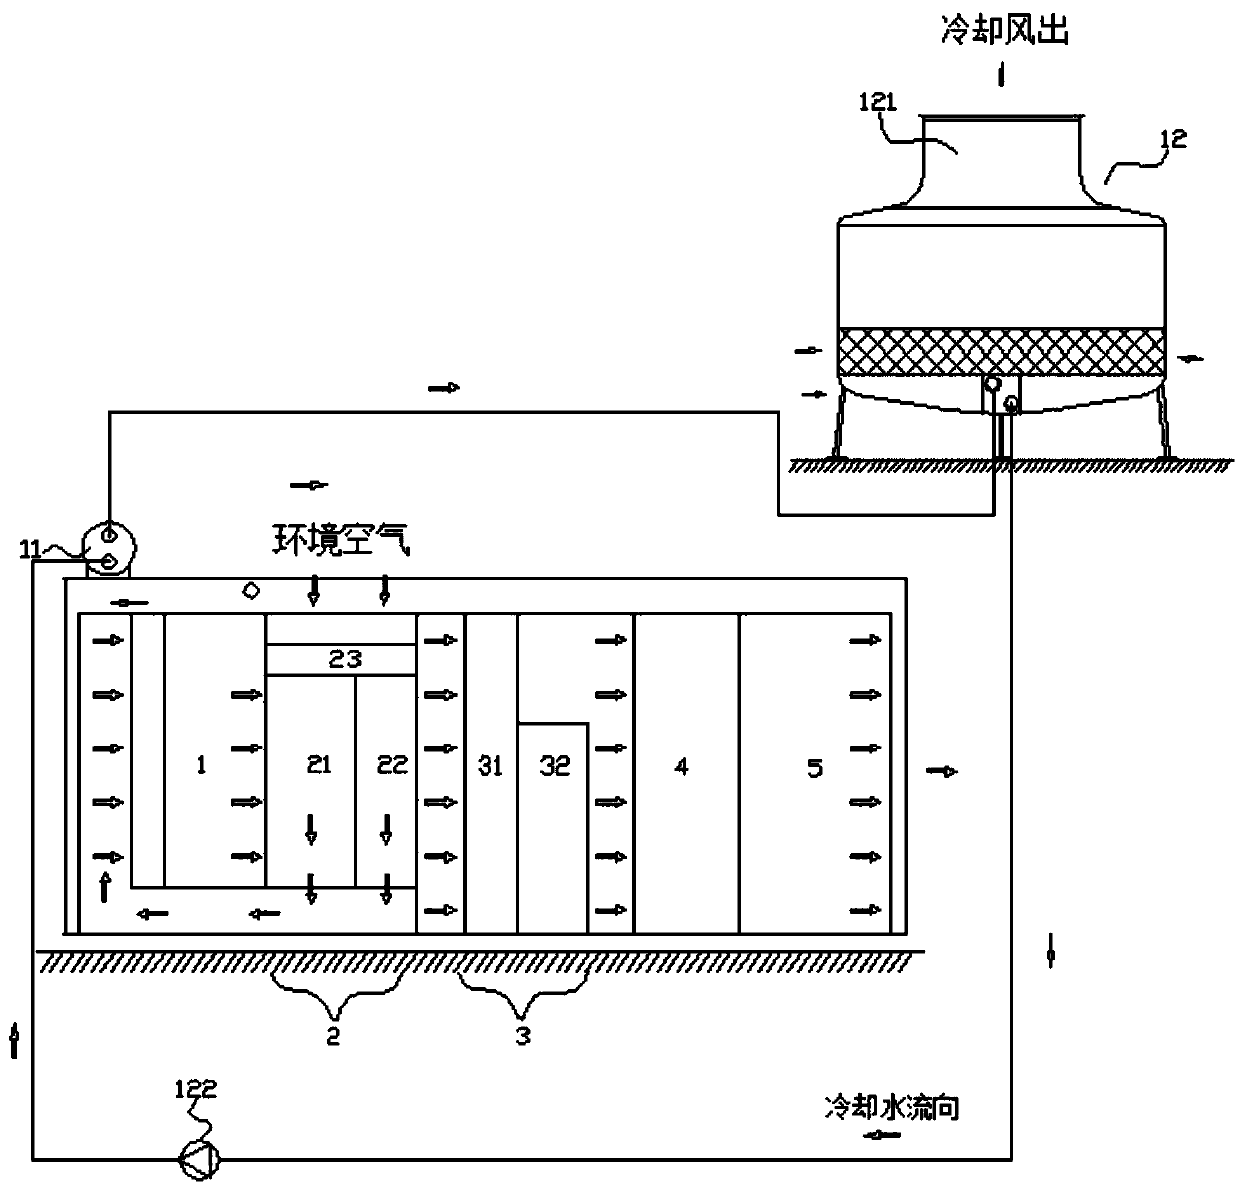 Four-season-type water-cooled dehumidification system and control method thereof